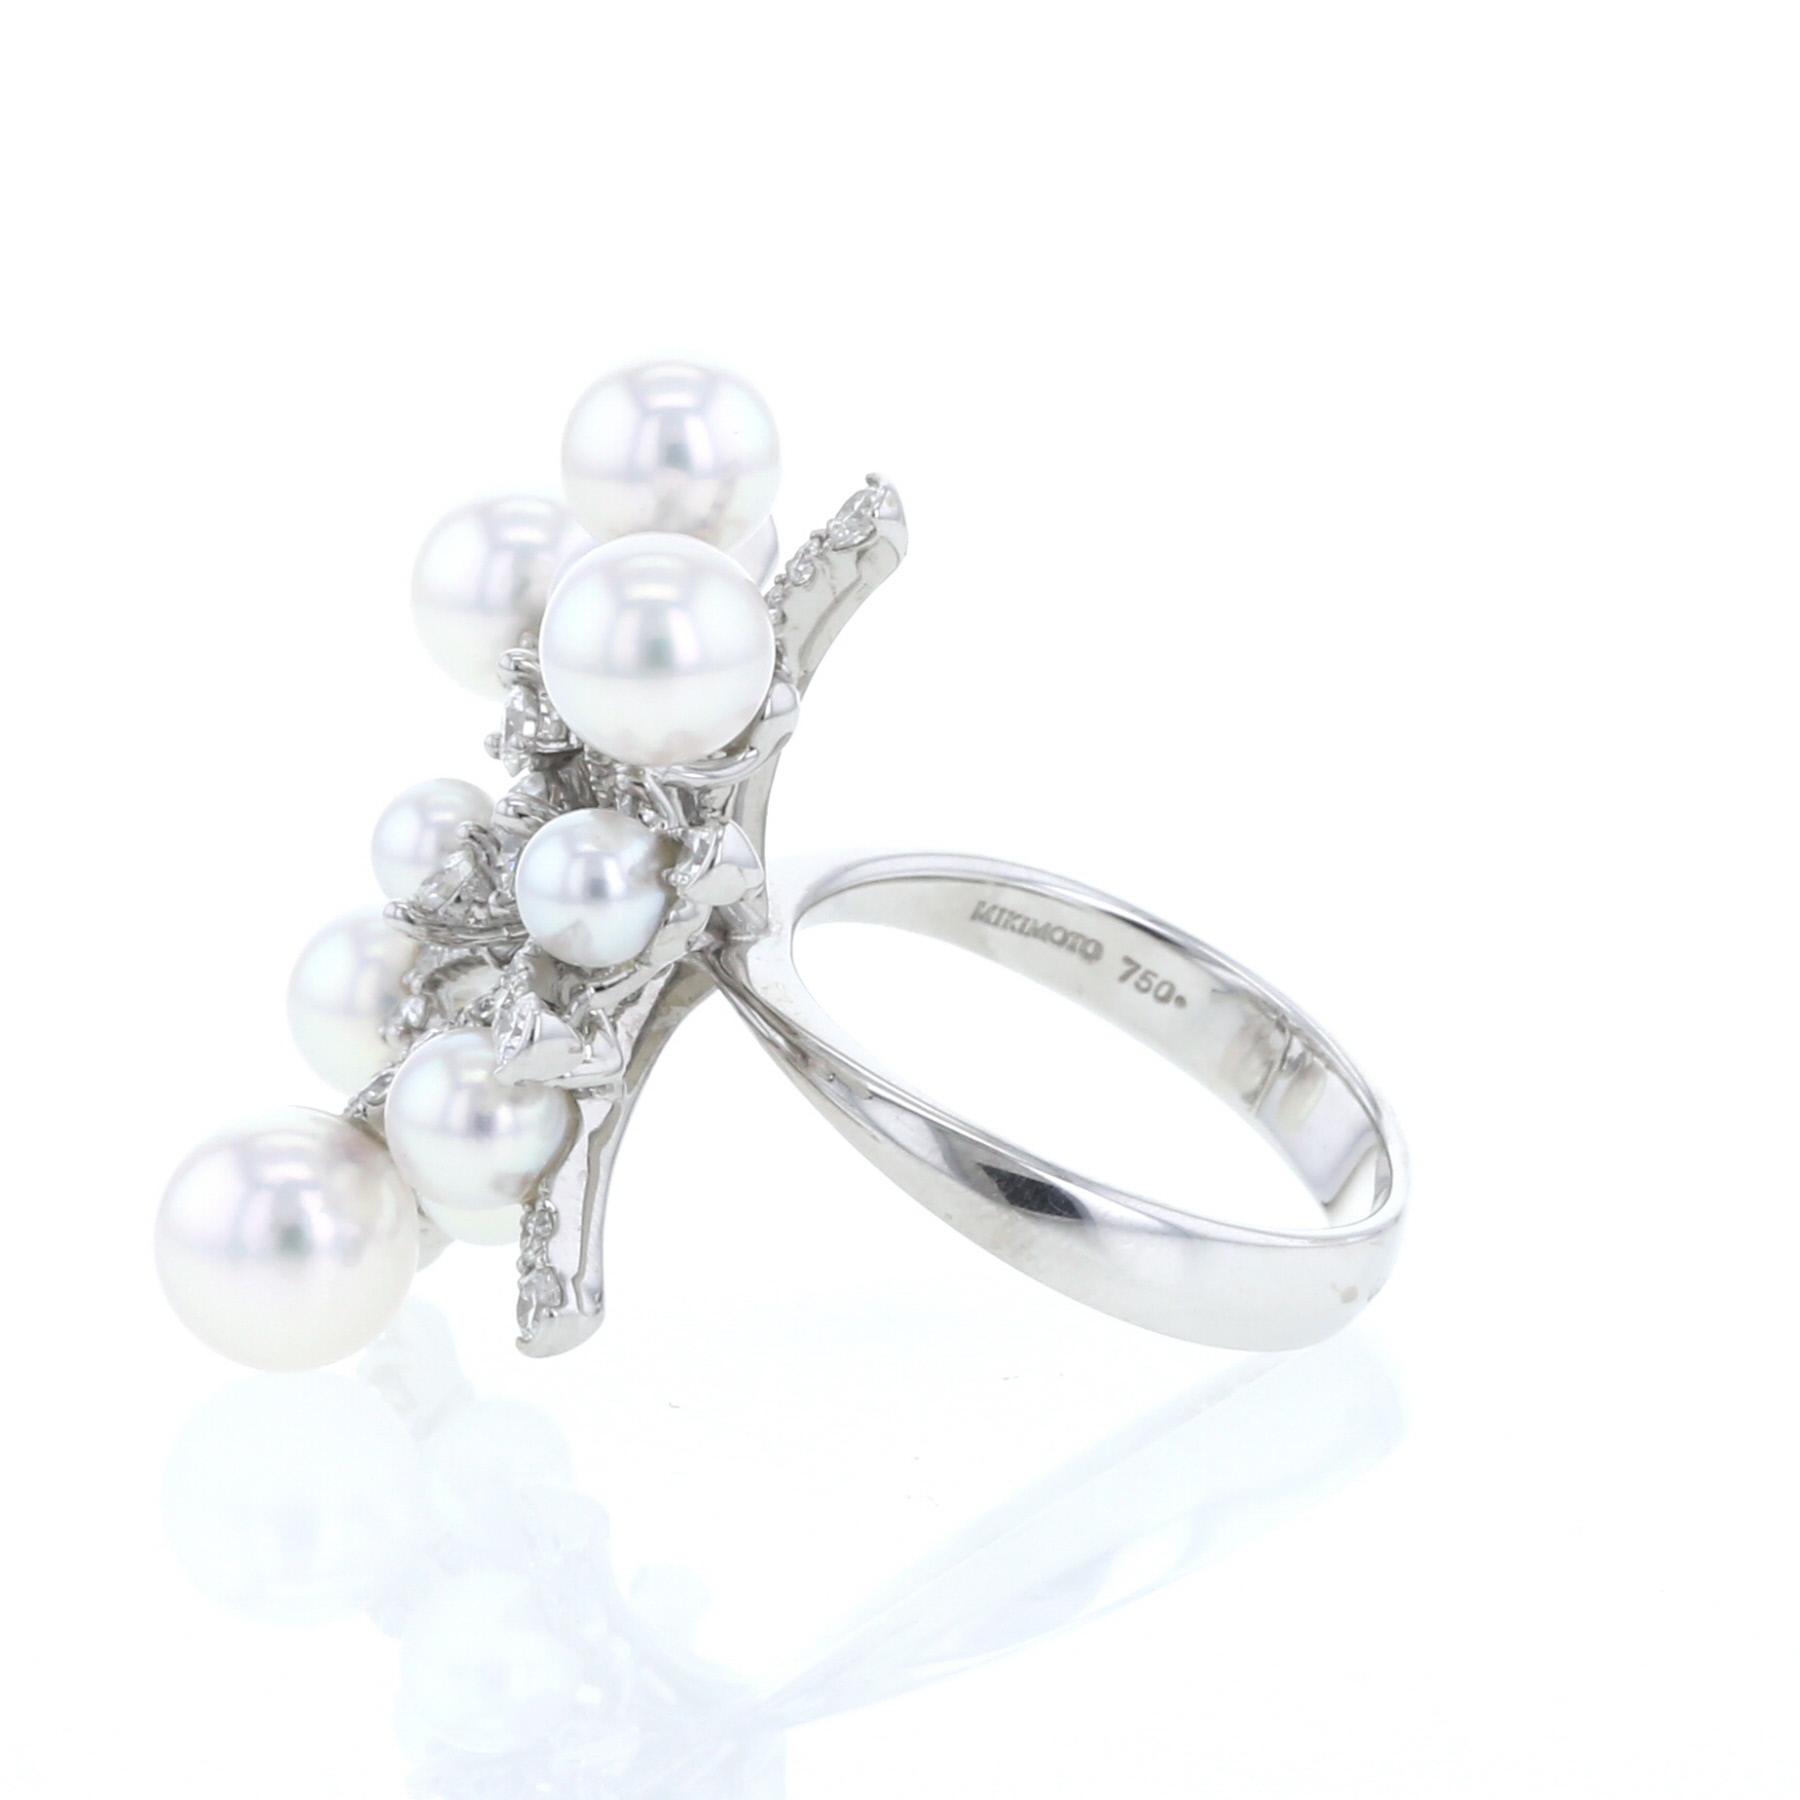 A World Of Creativity Ring In White Gold, Pearls And